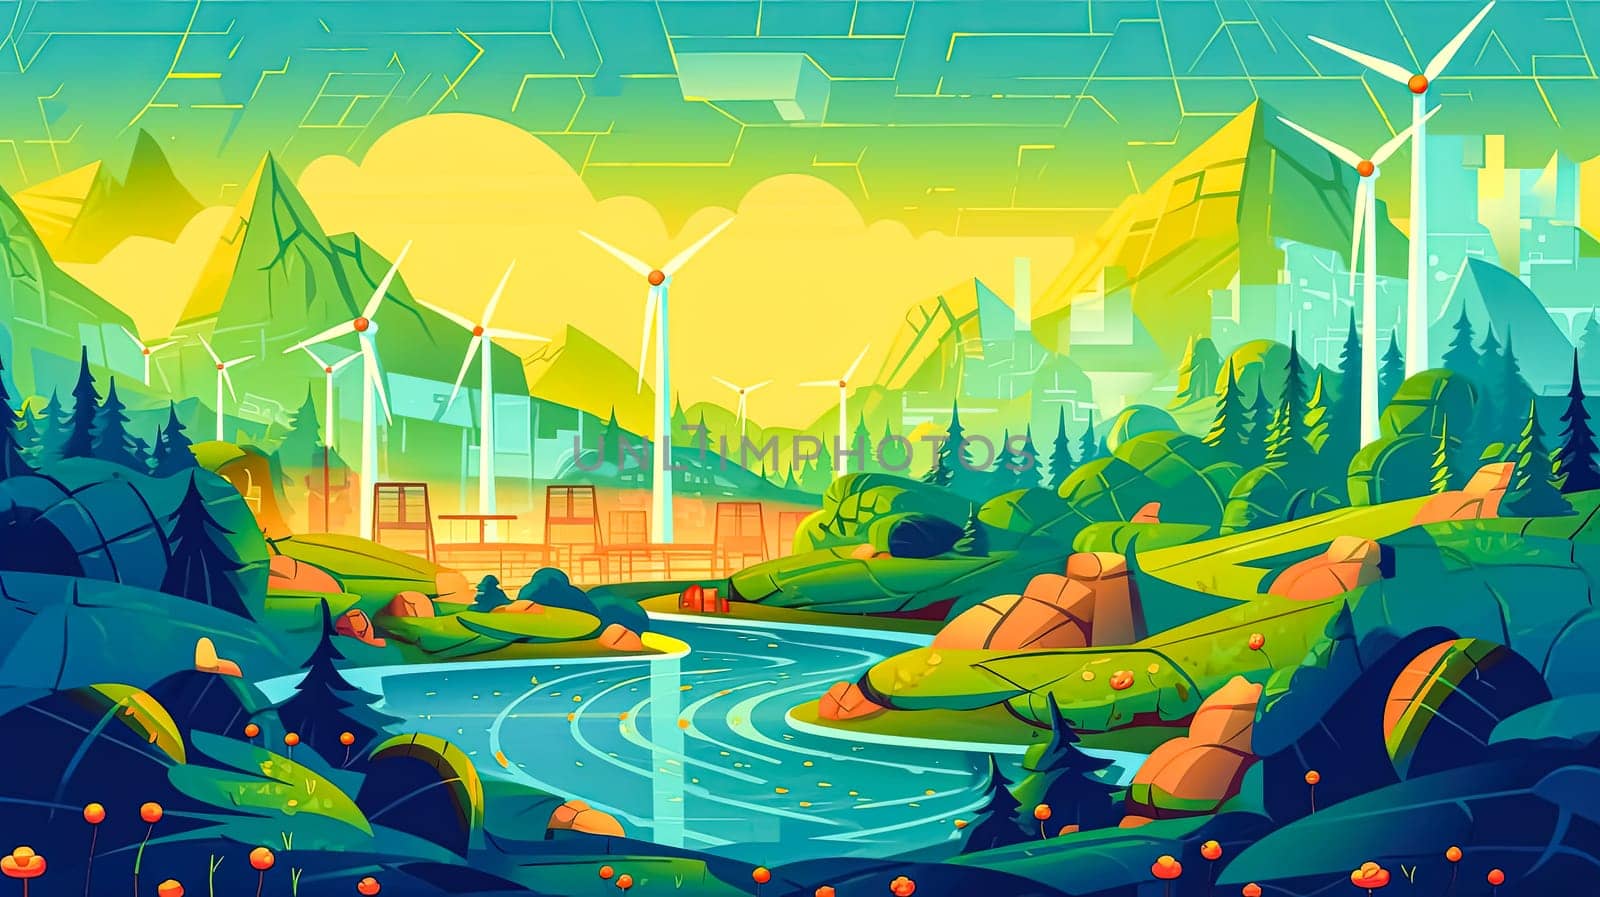 Green energy in action, Turbines turn amidst lush fields, a visual ode to sustainability and the commitment to preserve our planets natural splendor.